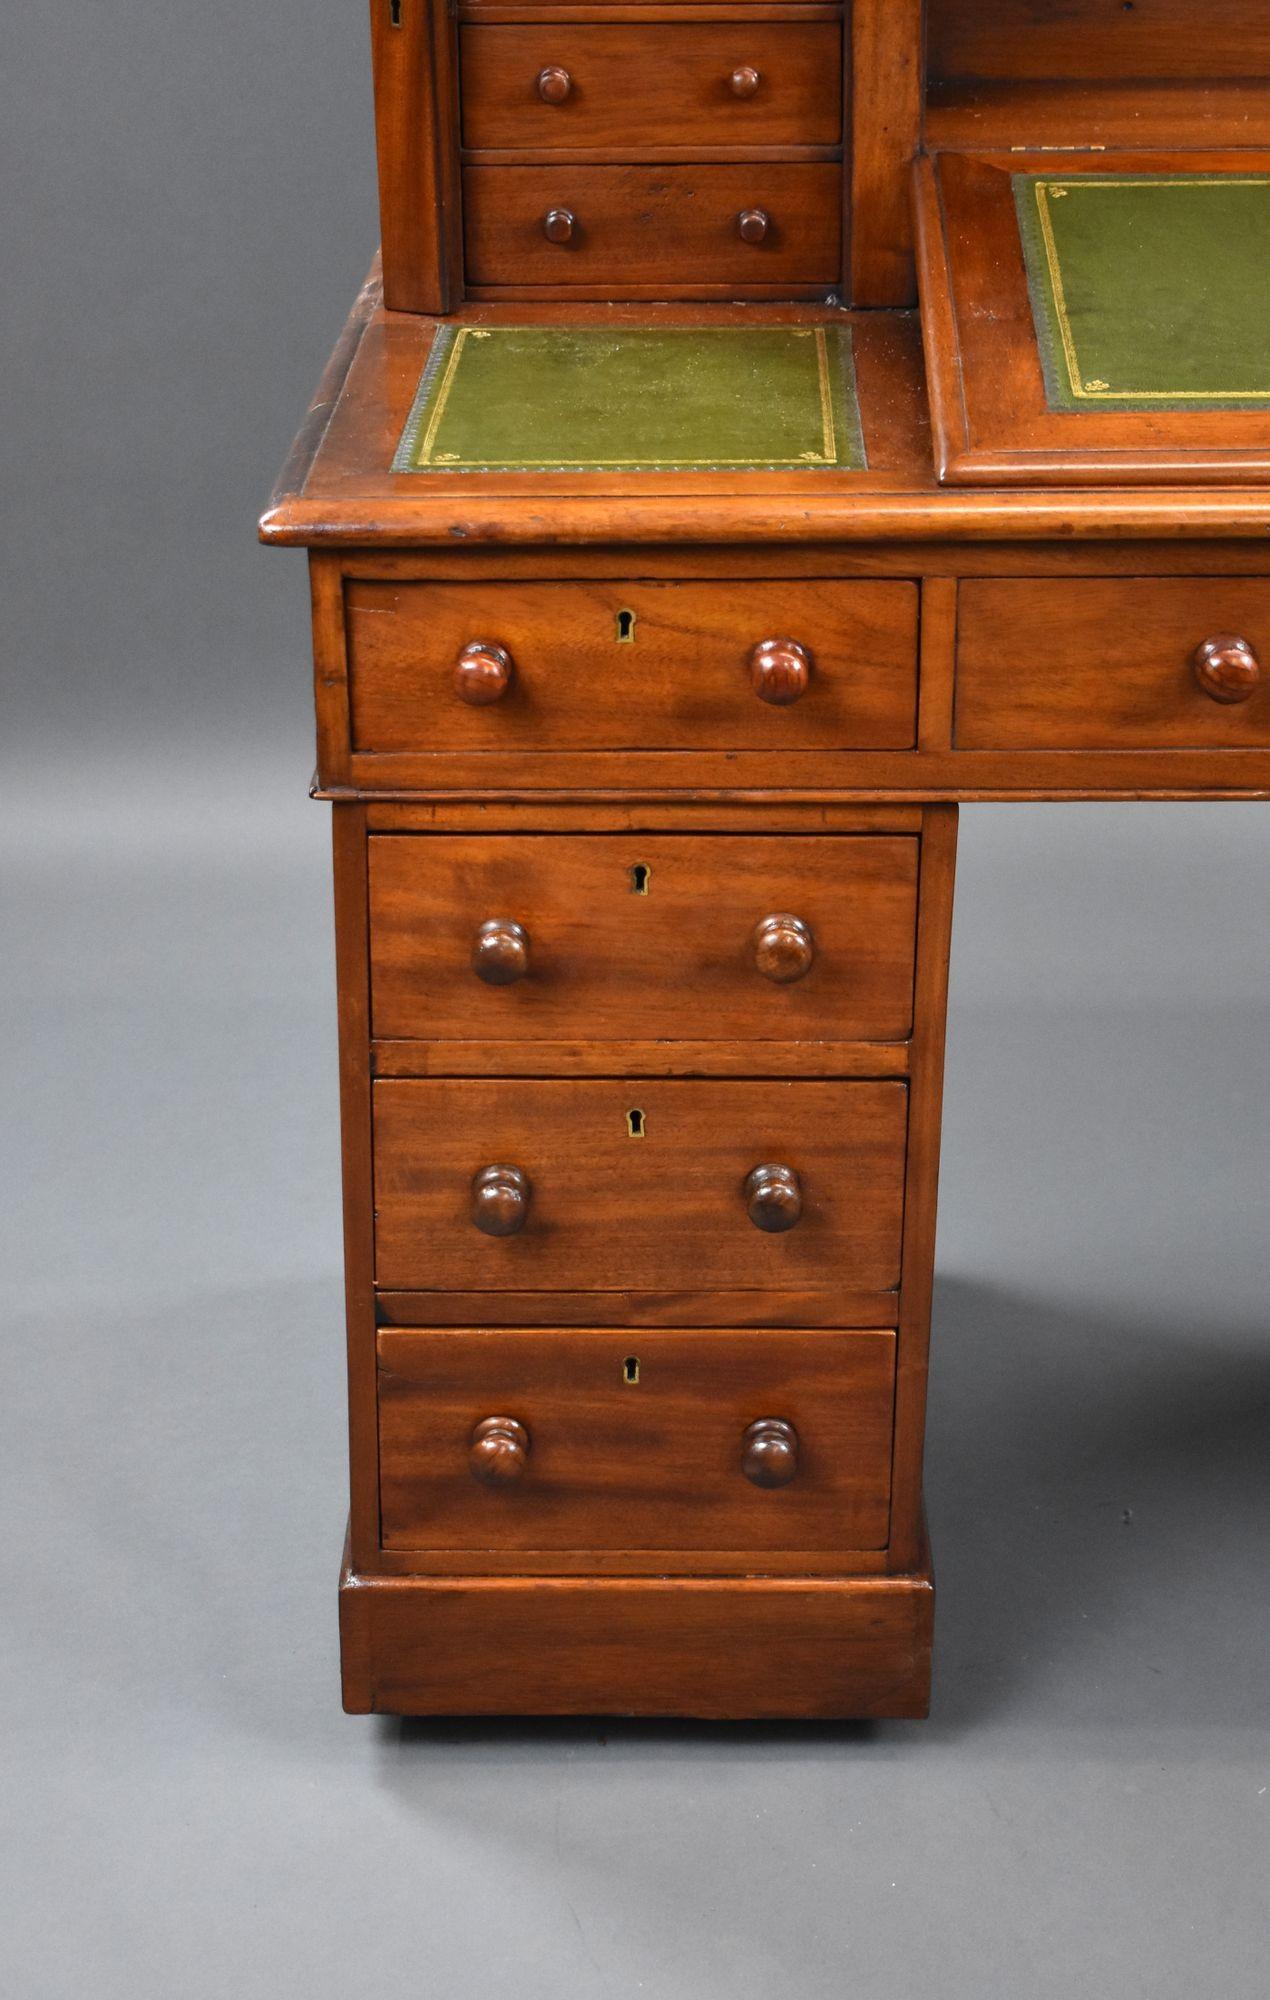 For sale is a Victorian mahogany dickens desk, having four drawers on each side of the top, locked with a side locker, with three green leather inserts and a rising fall in the centre, above a faux drawer flanked by drawers on either side. Each